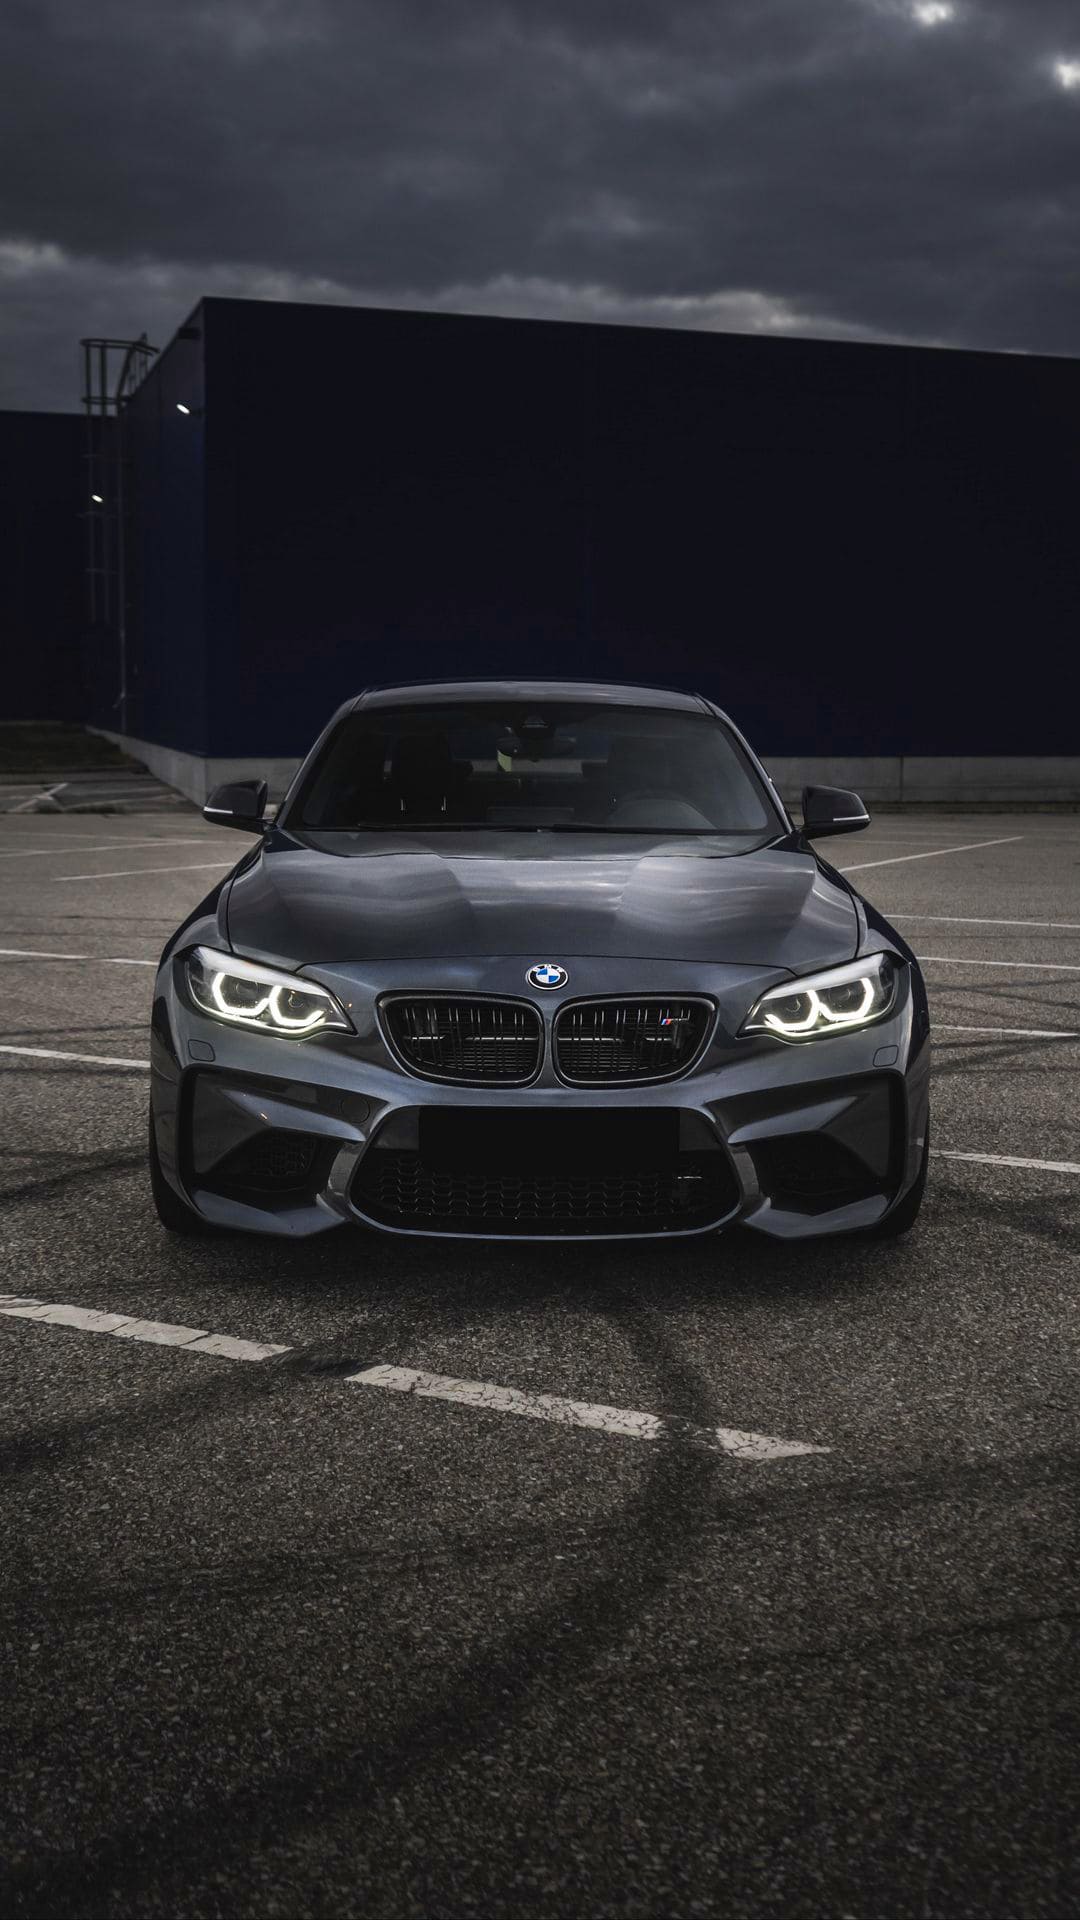 BMW M3 iPhone Wallpapers